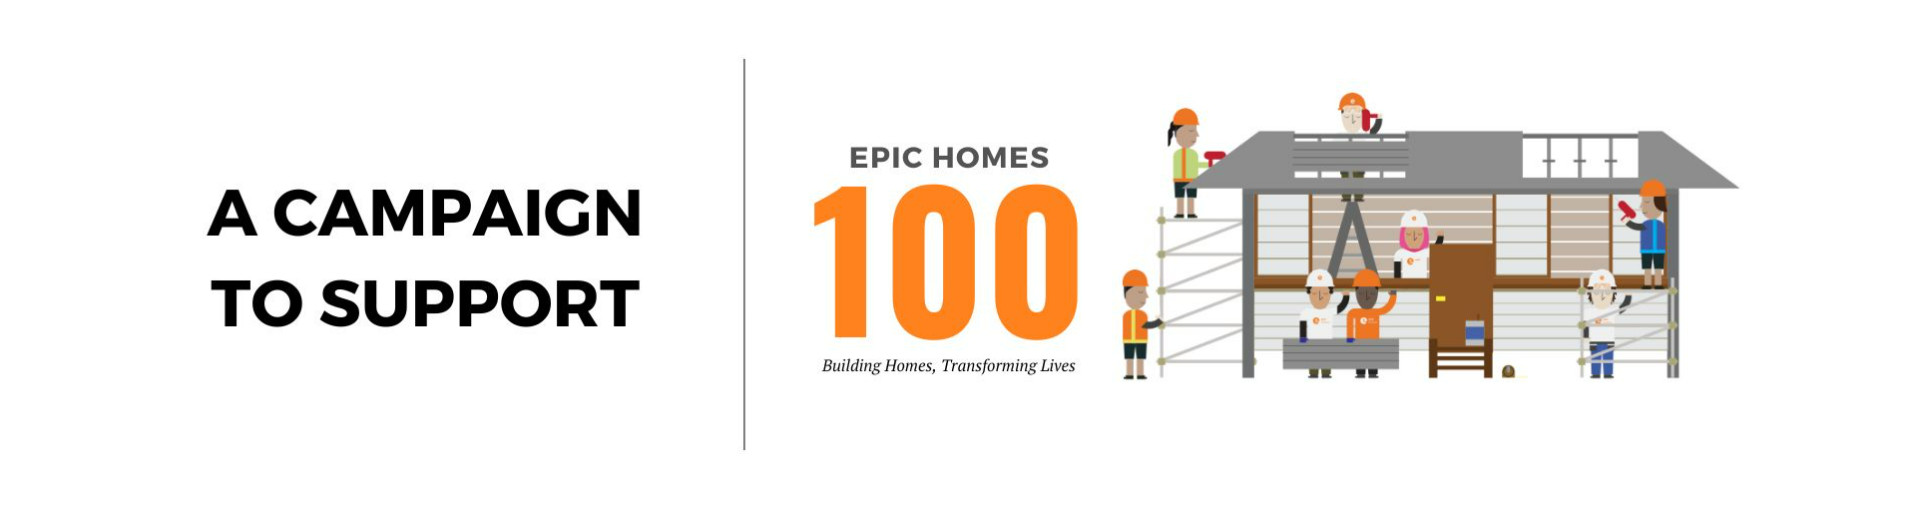 Building Together : Support The EPIC HOME Movement